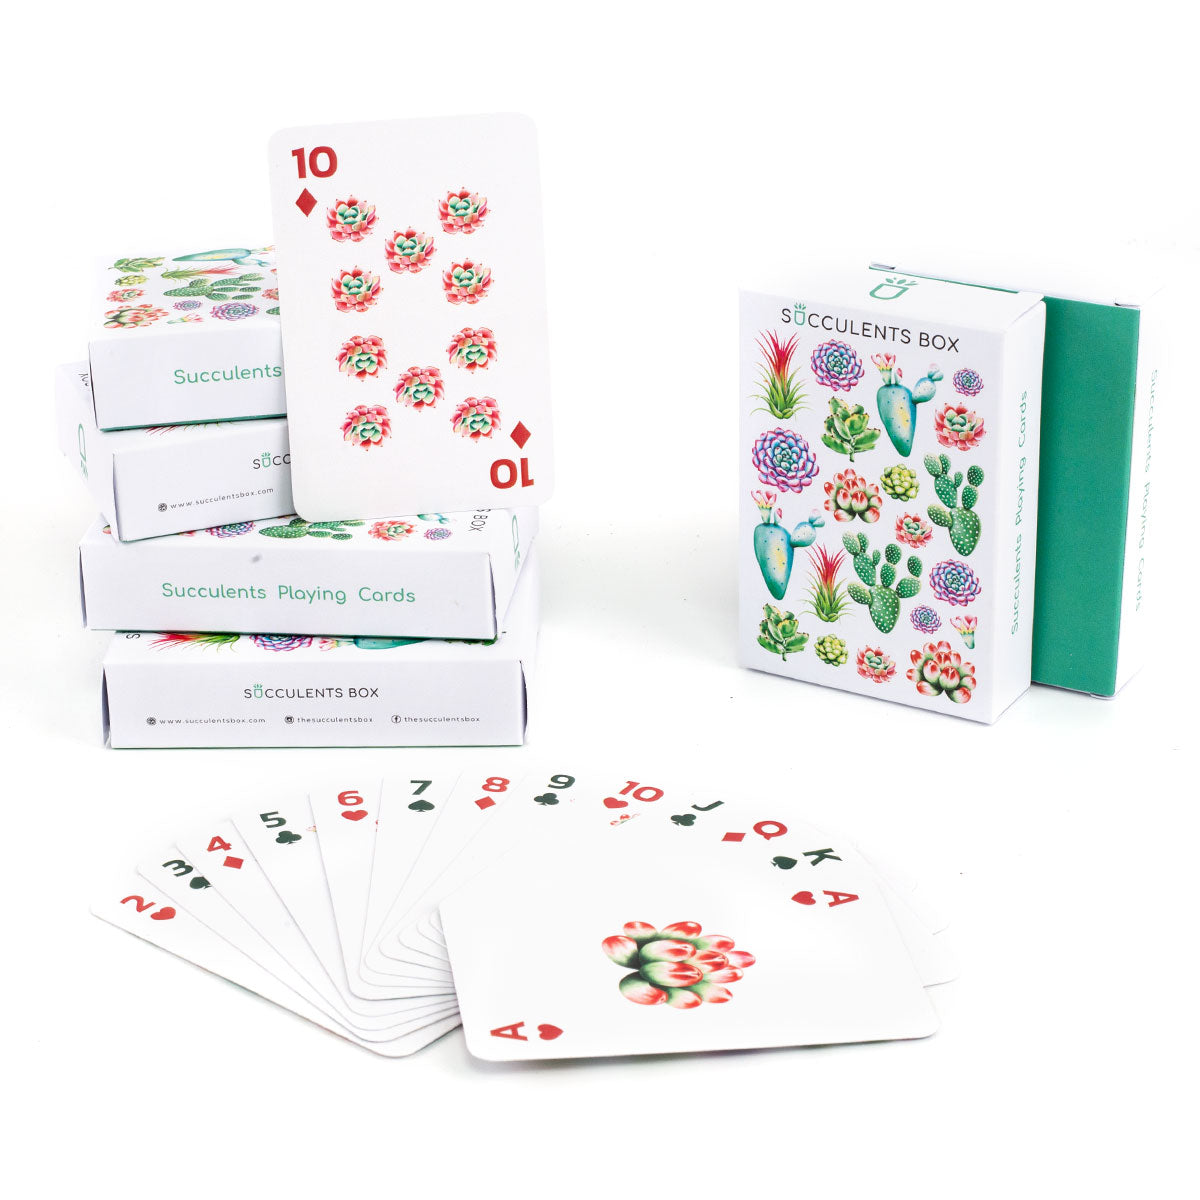  succulent craft ideas, succulent gift ideas, succulents playing cards